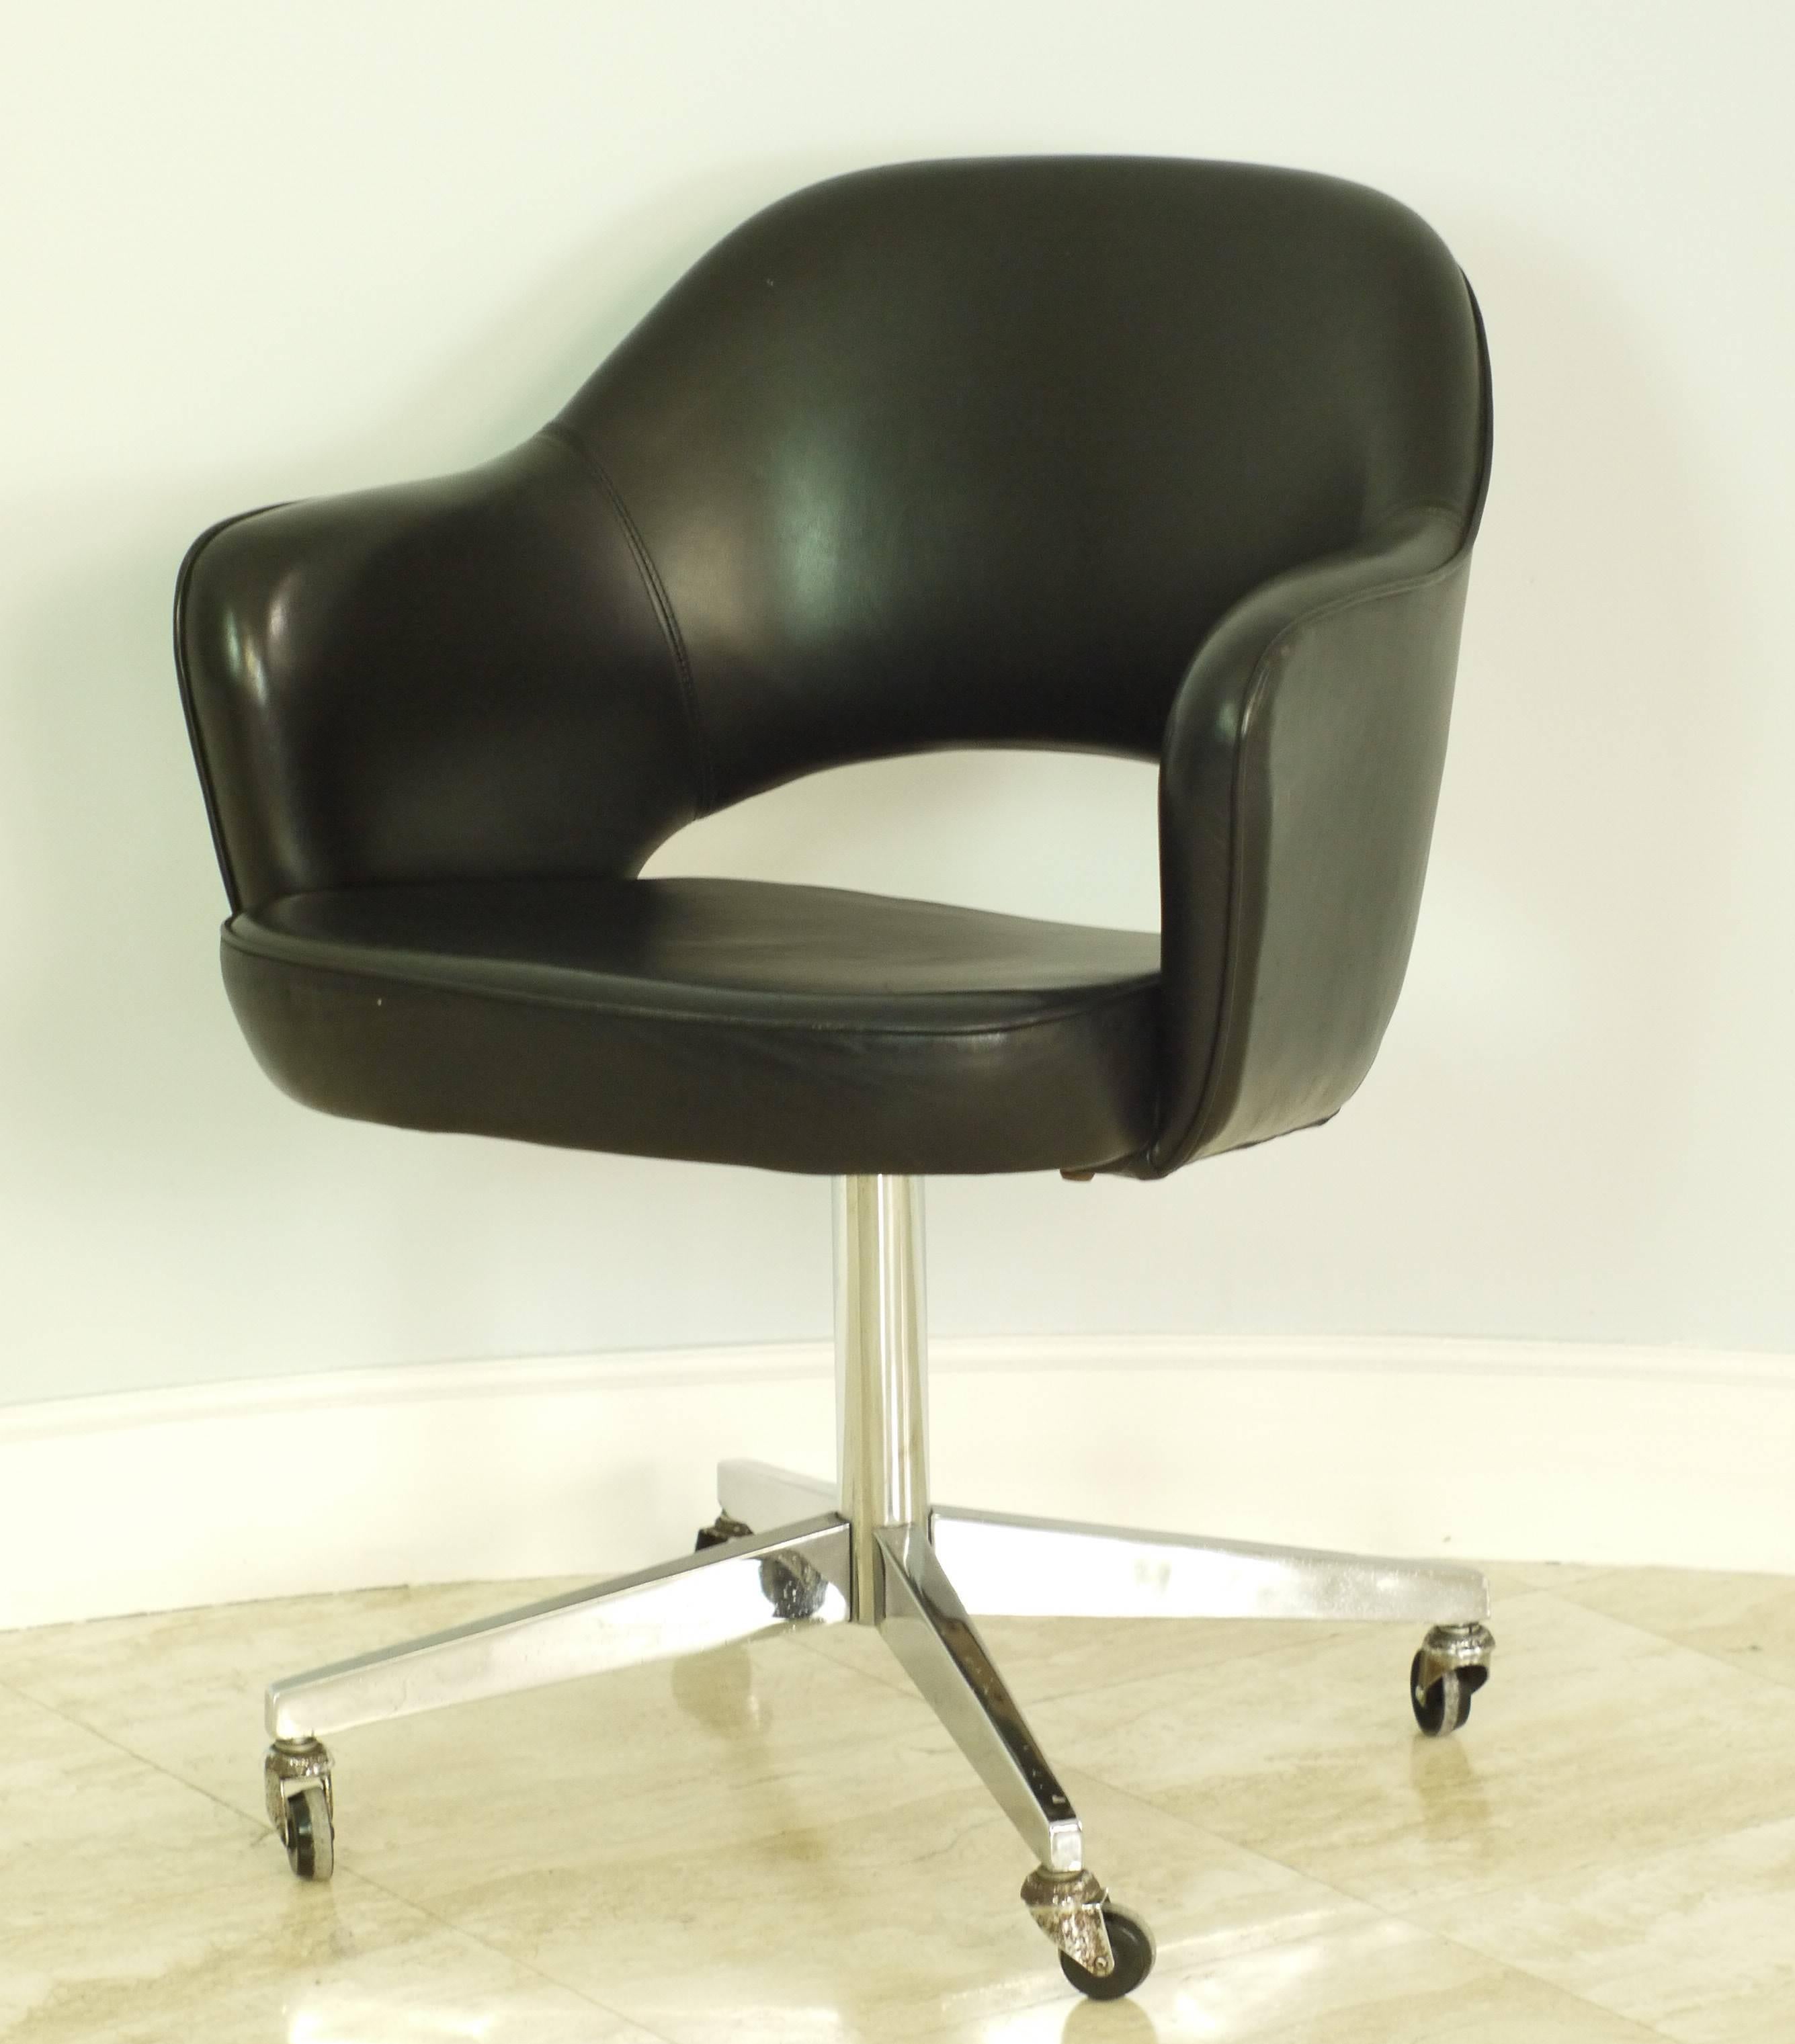 Office swivel armchair by Eero Saarinen for Knoll. Original black faux leather upholstery.